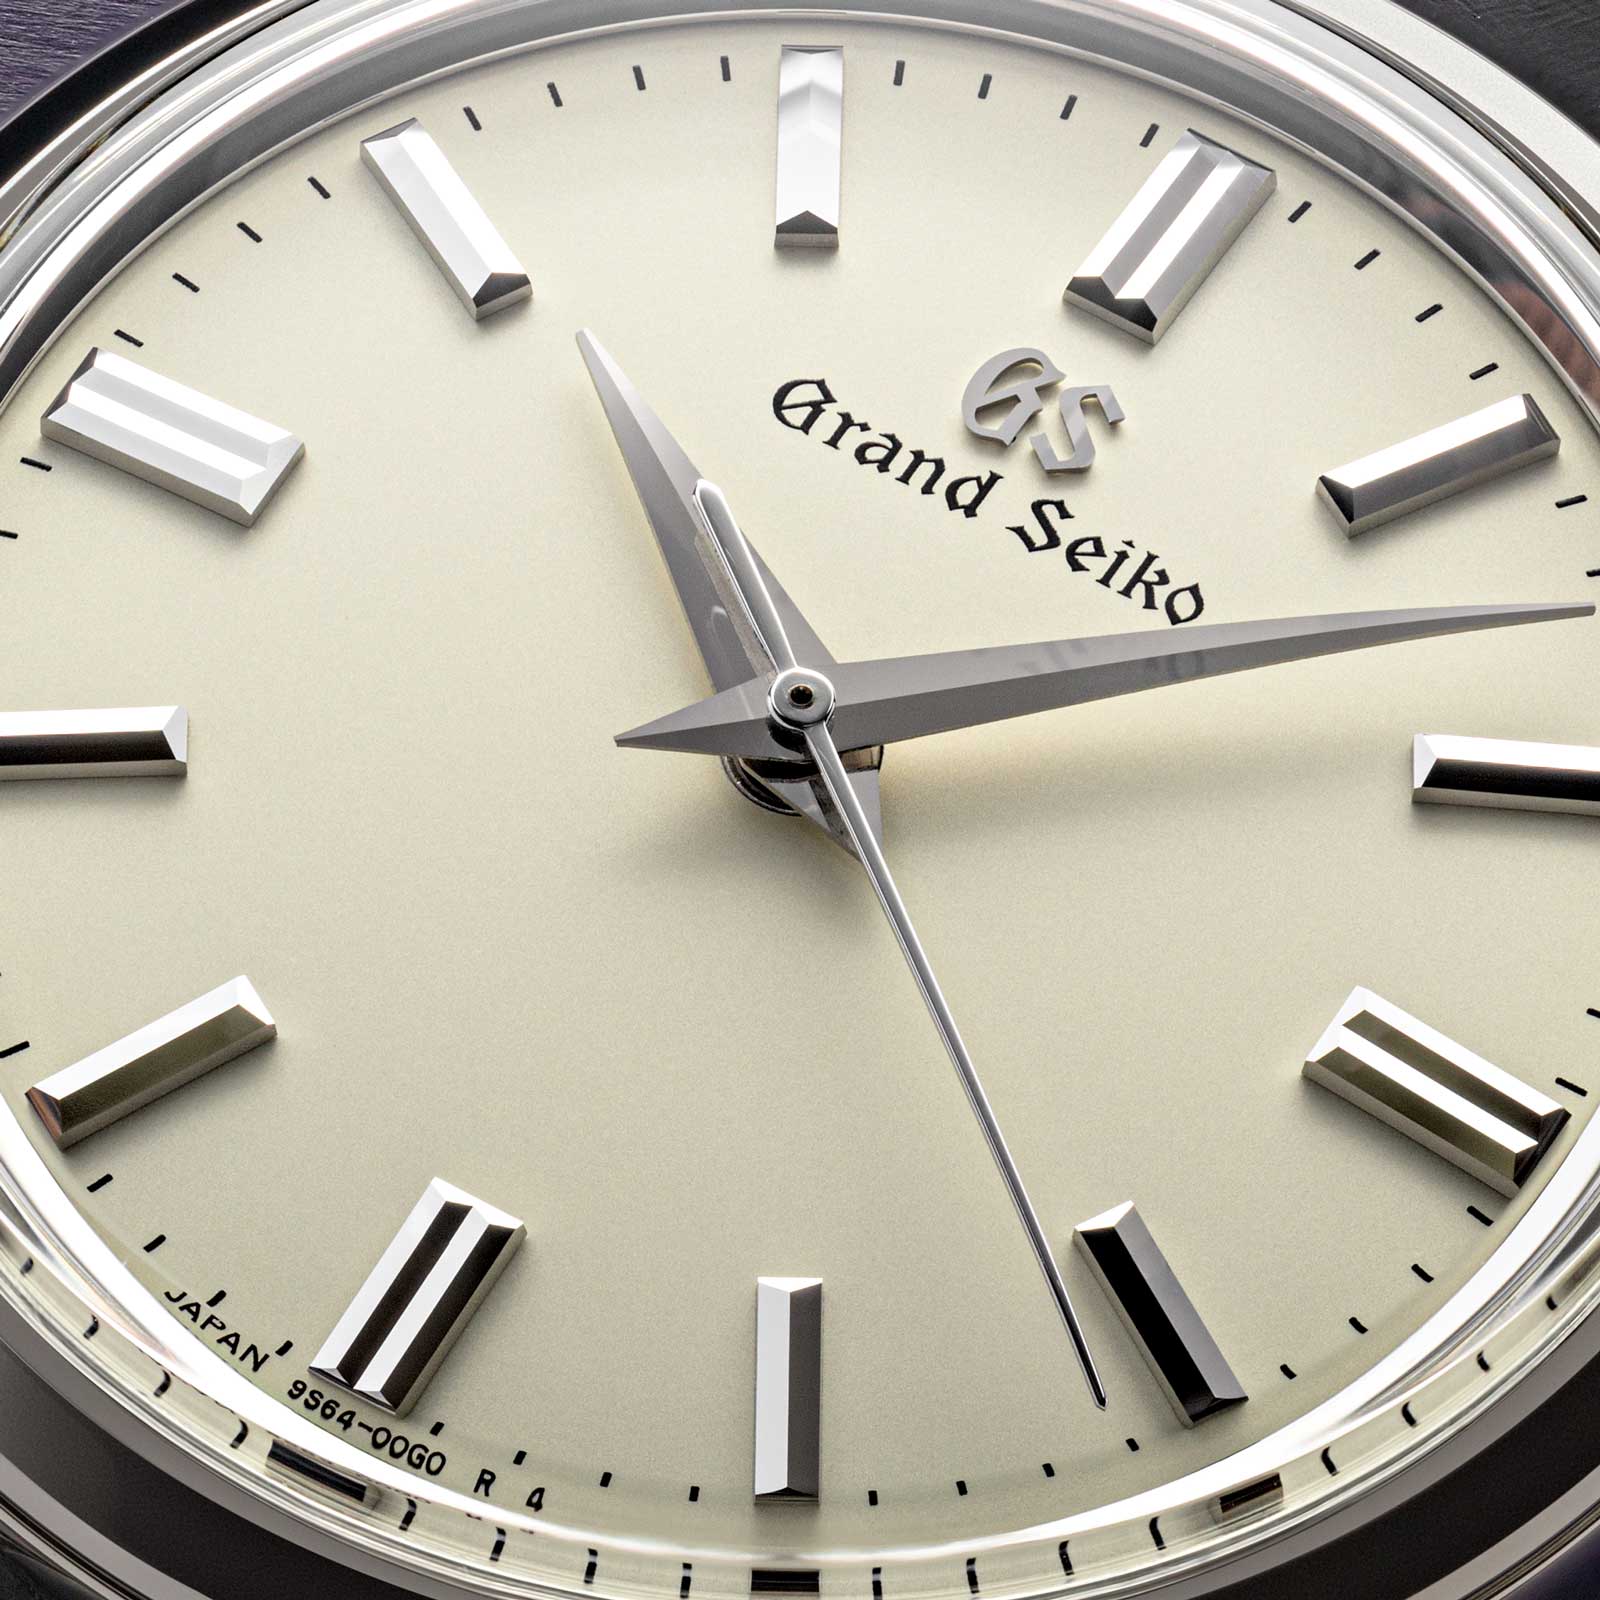 Grand Seiko SBGW231 manual winding men's luxury watch with ivory dial.